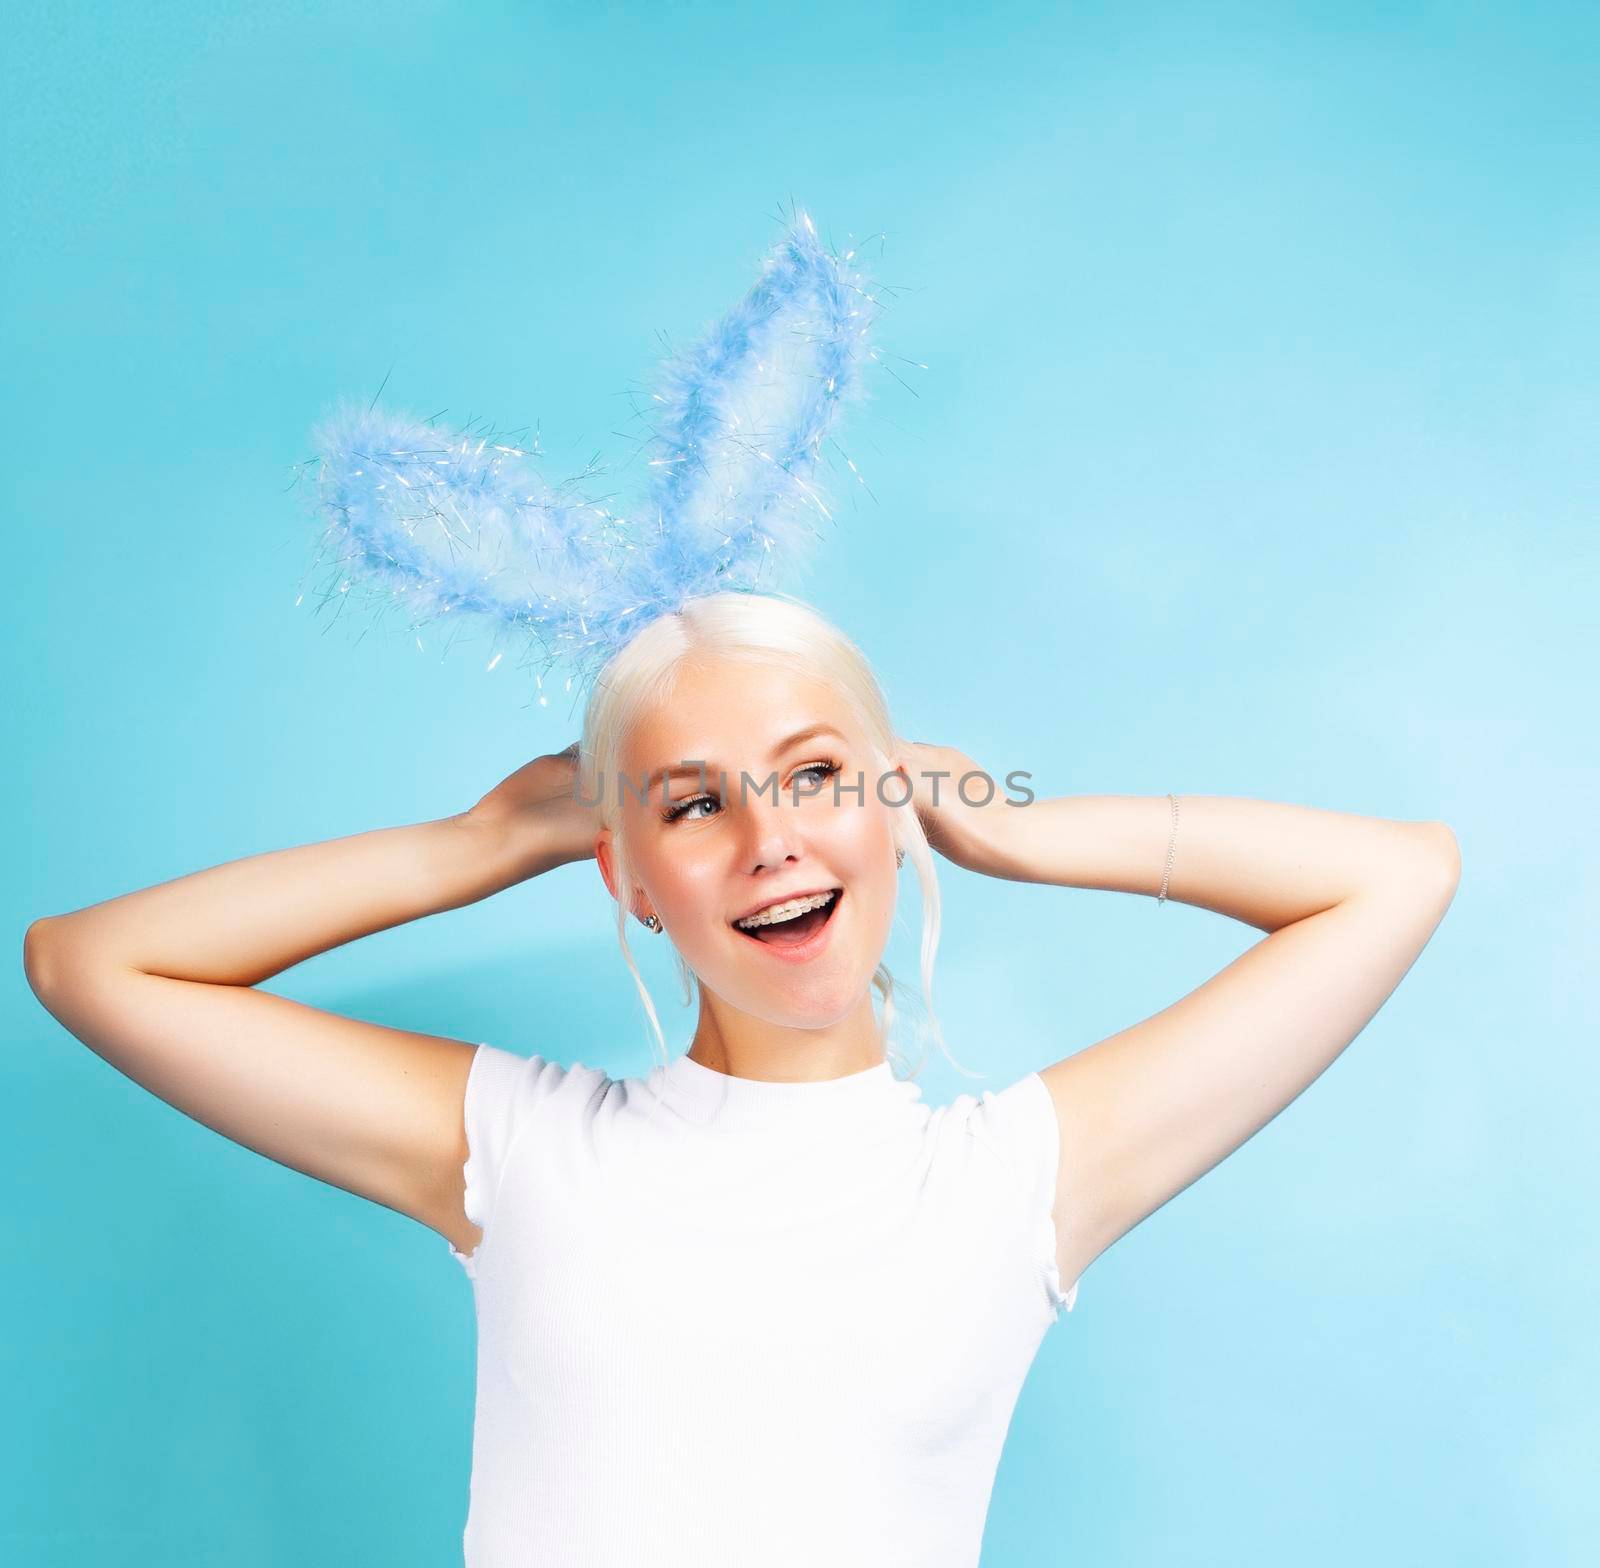 young pretty blond girl with rabbit ears posing cheerful on blue background, lifestyle people concept by JordanJ